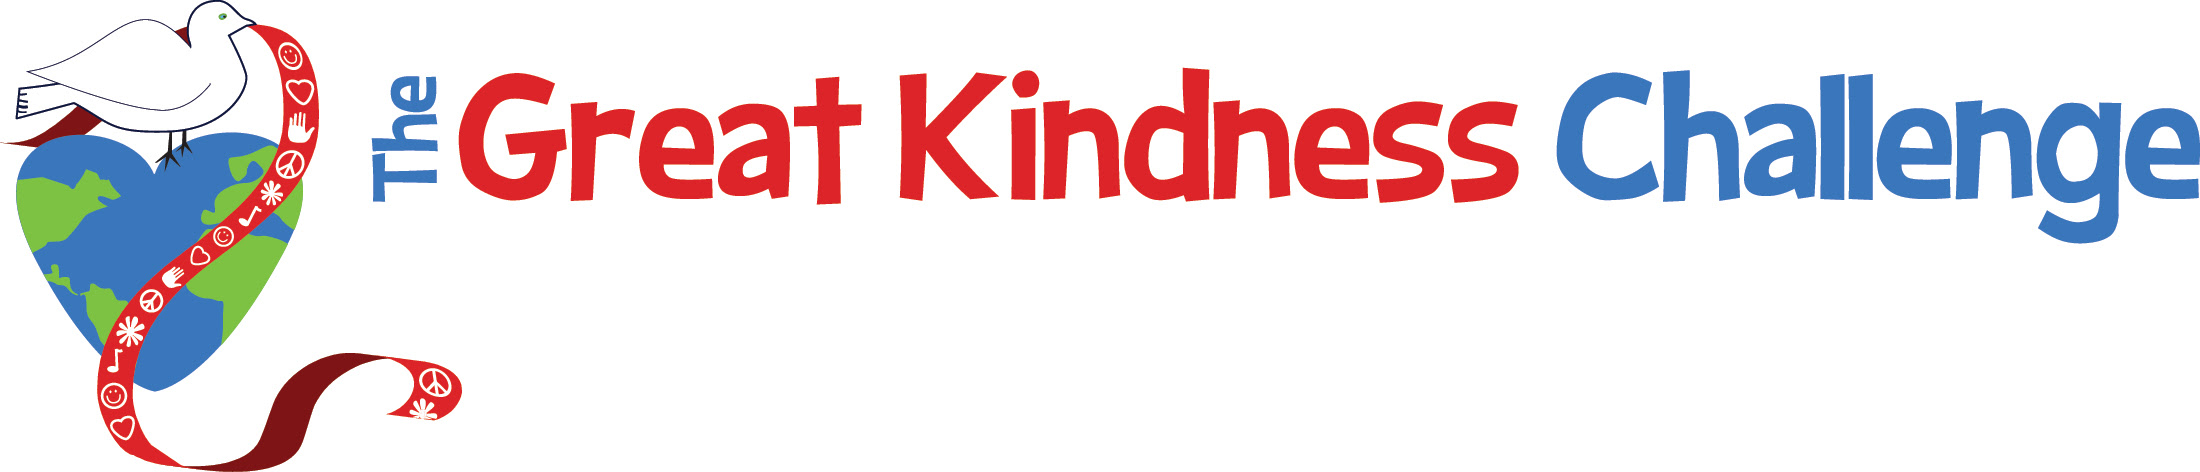 Great Kindness Challenge pic